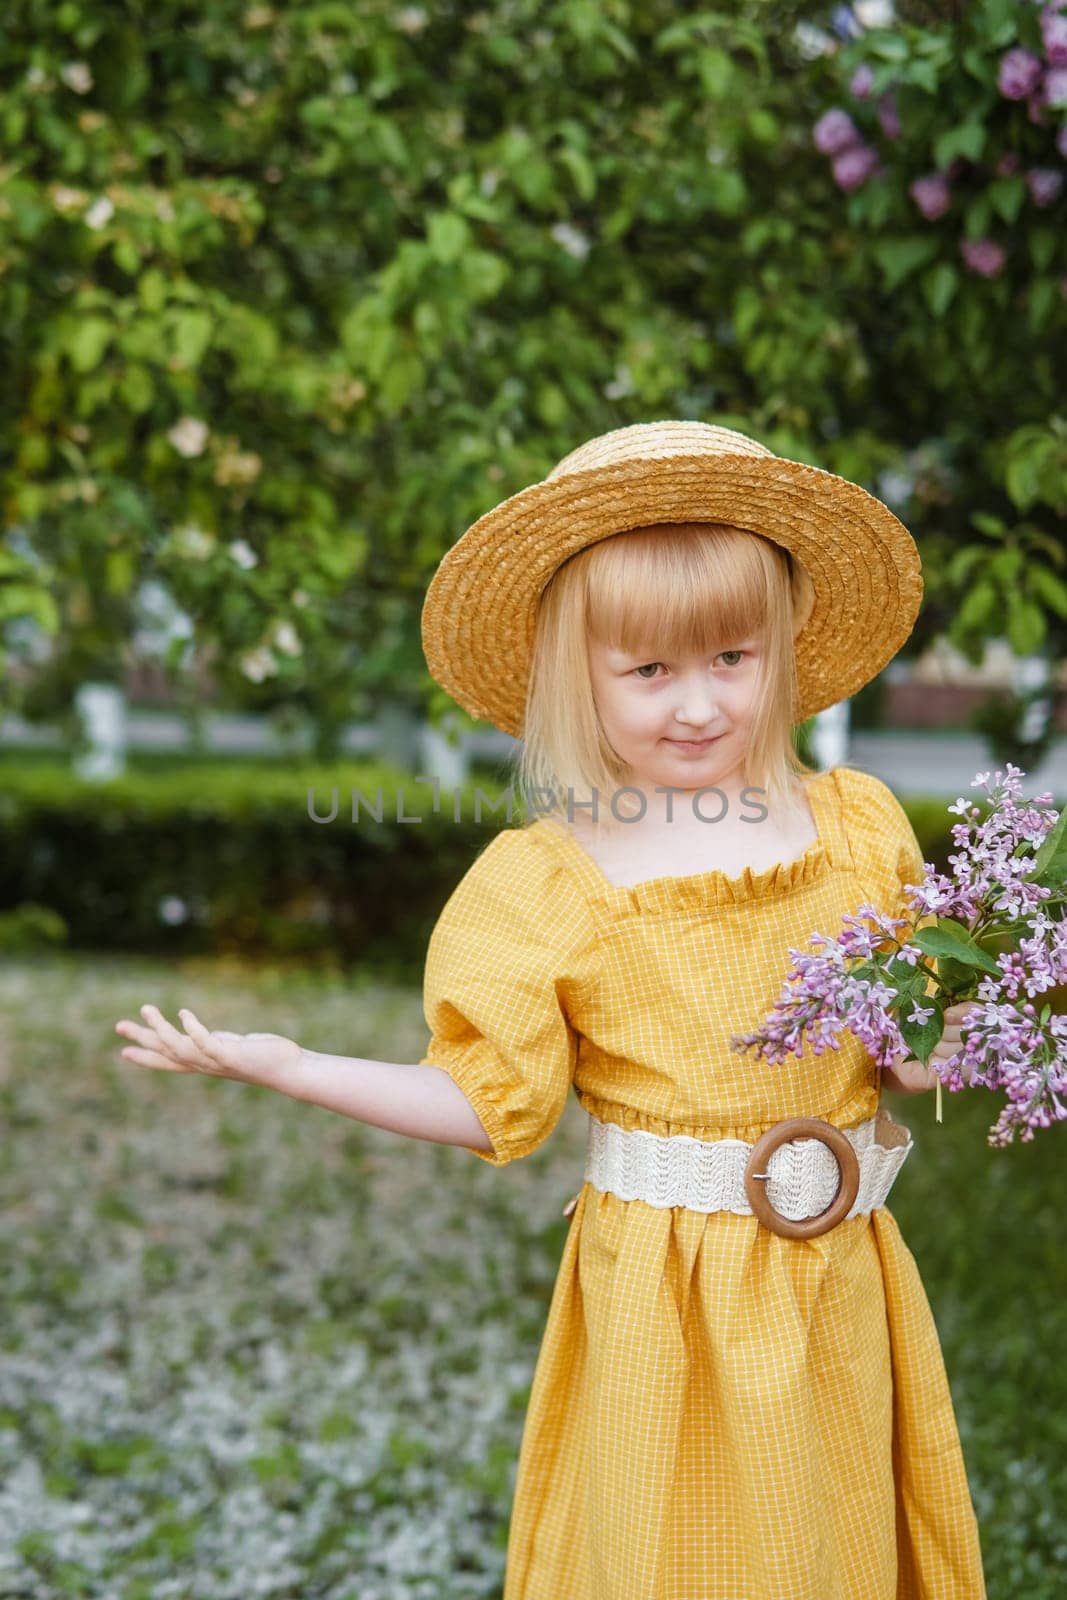 A little girl in a yellow dress and straw hat wearing a bouquet of lilacs. A walk in a spring park, blossoming lilacs. by Annu1tochka